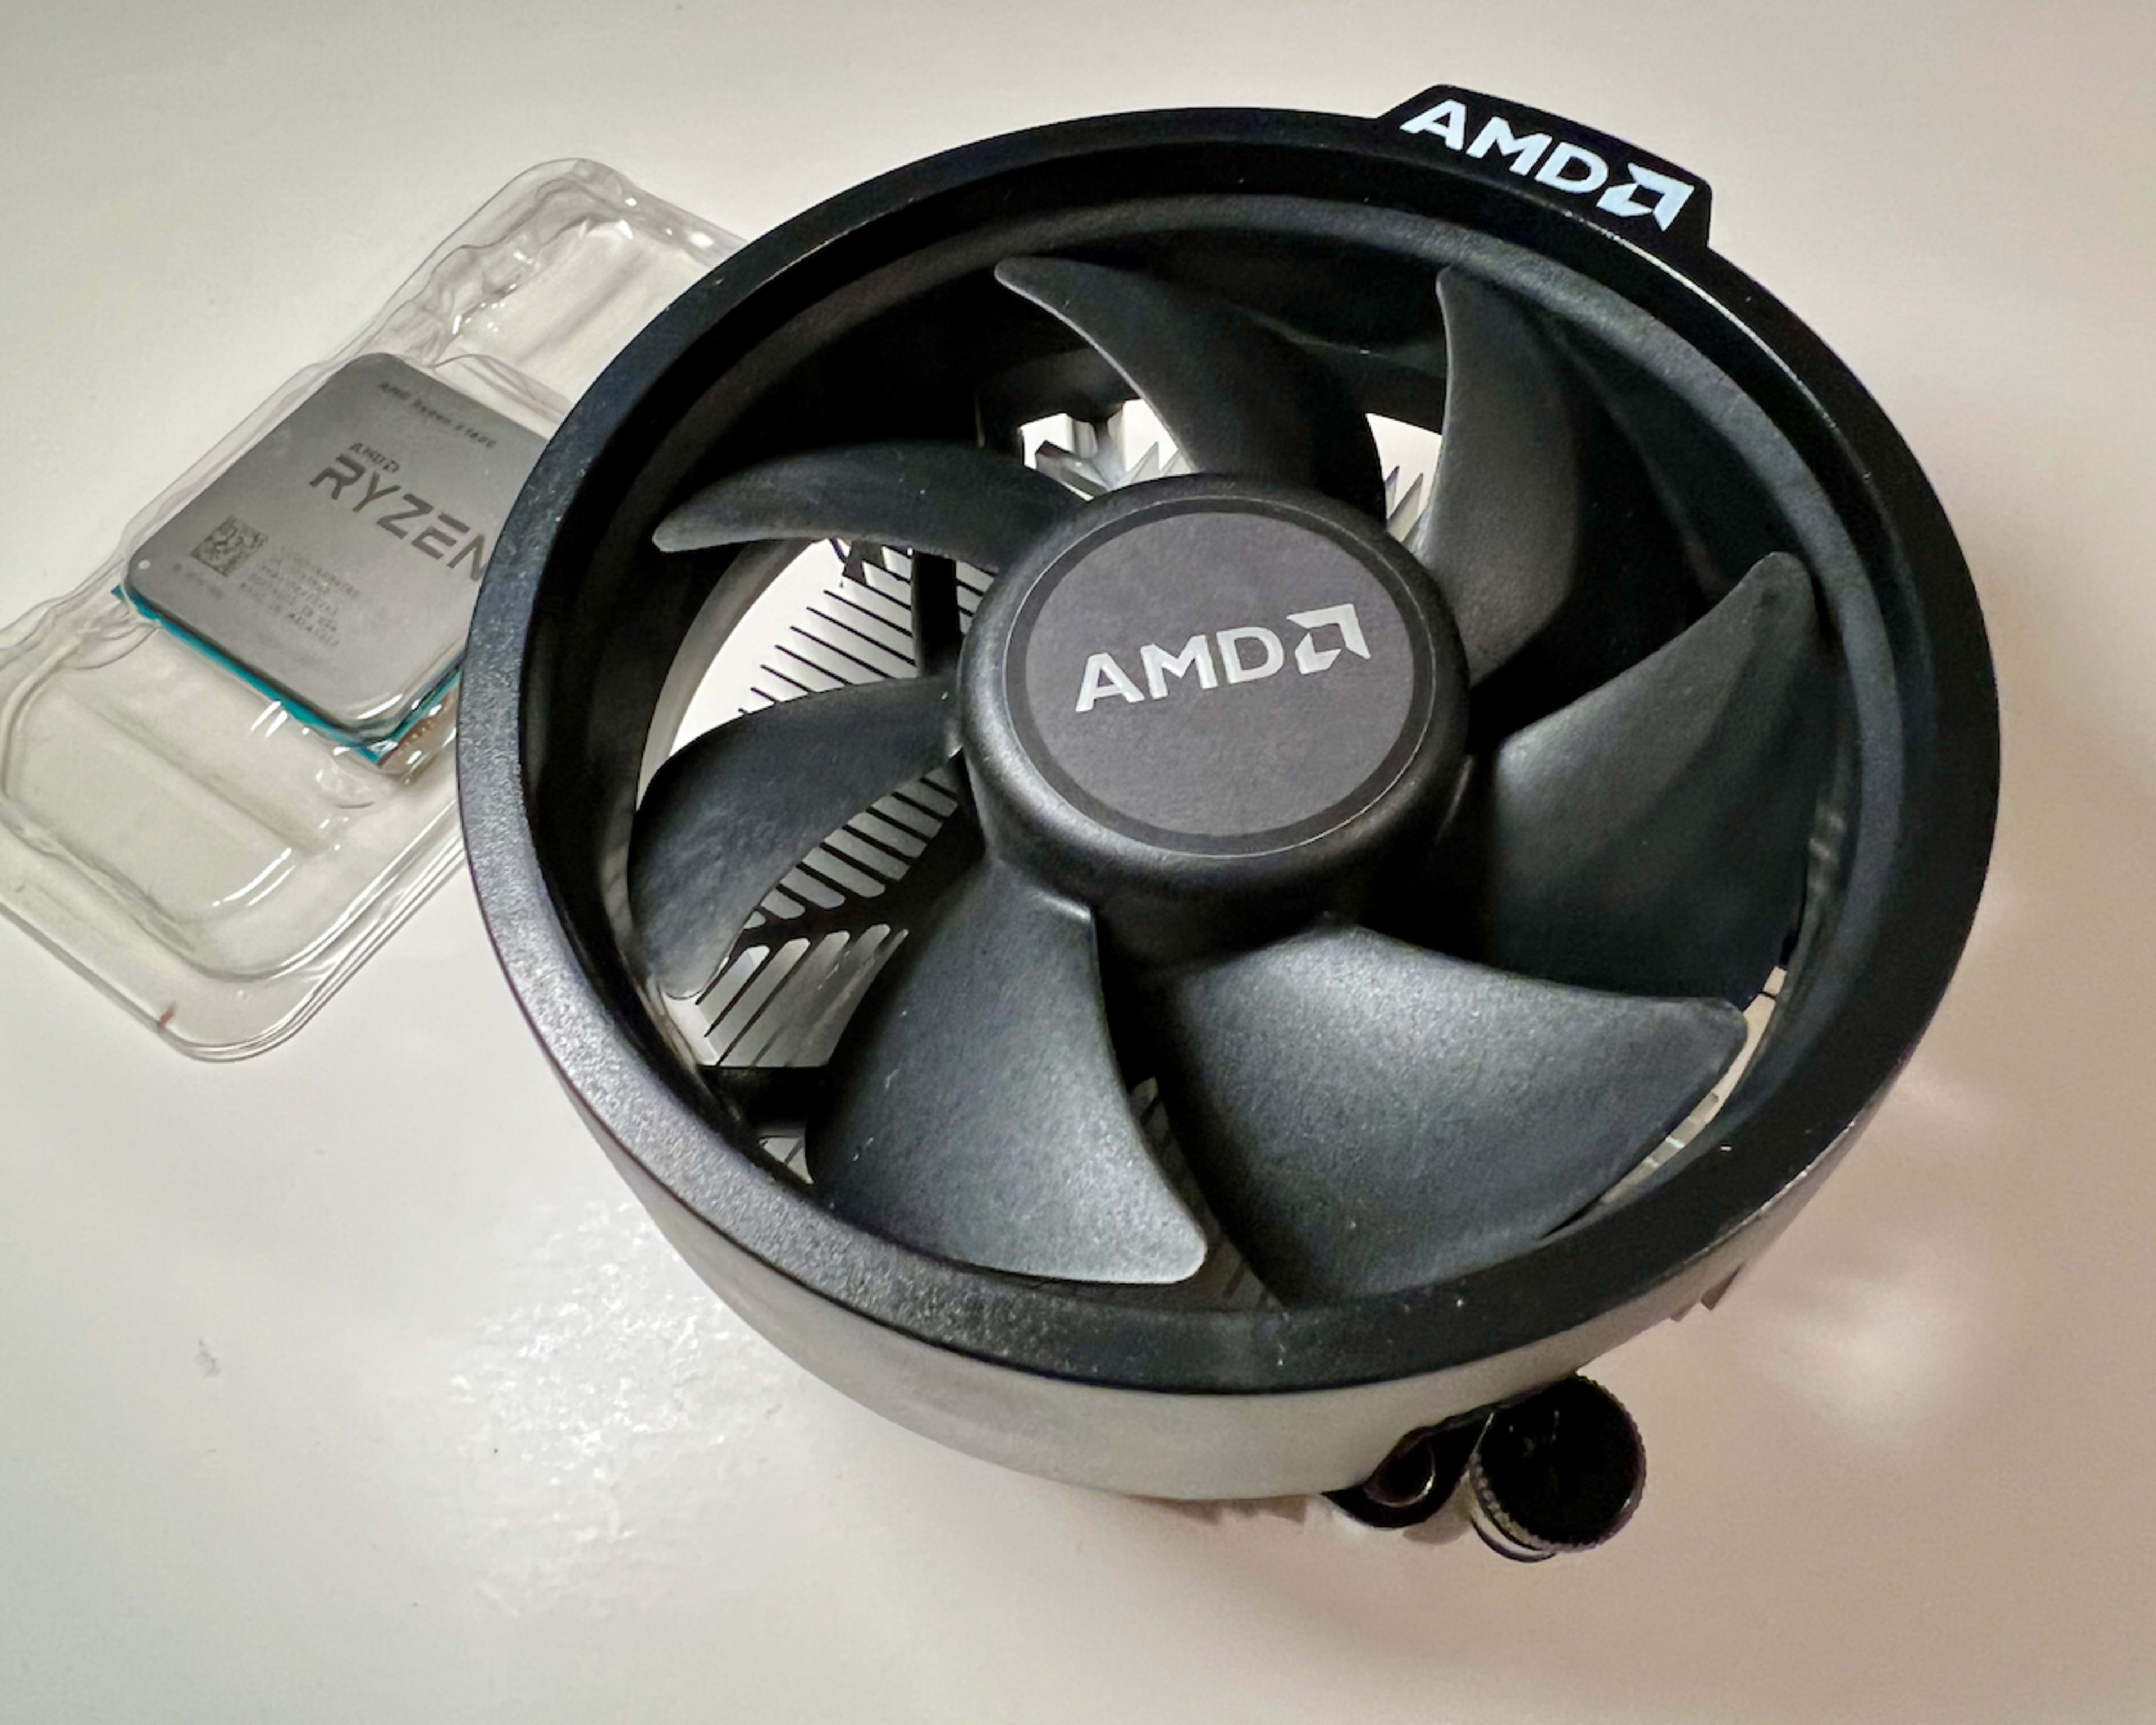 AMD Ryzen 5 1600 with Wraith Stealth Cooler